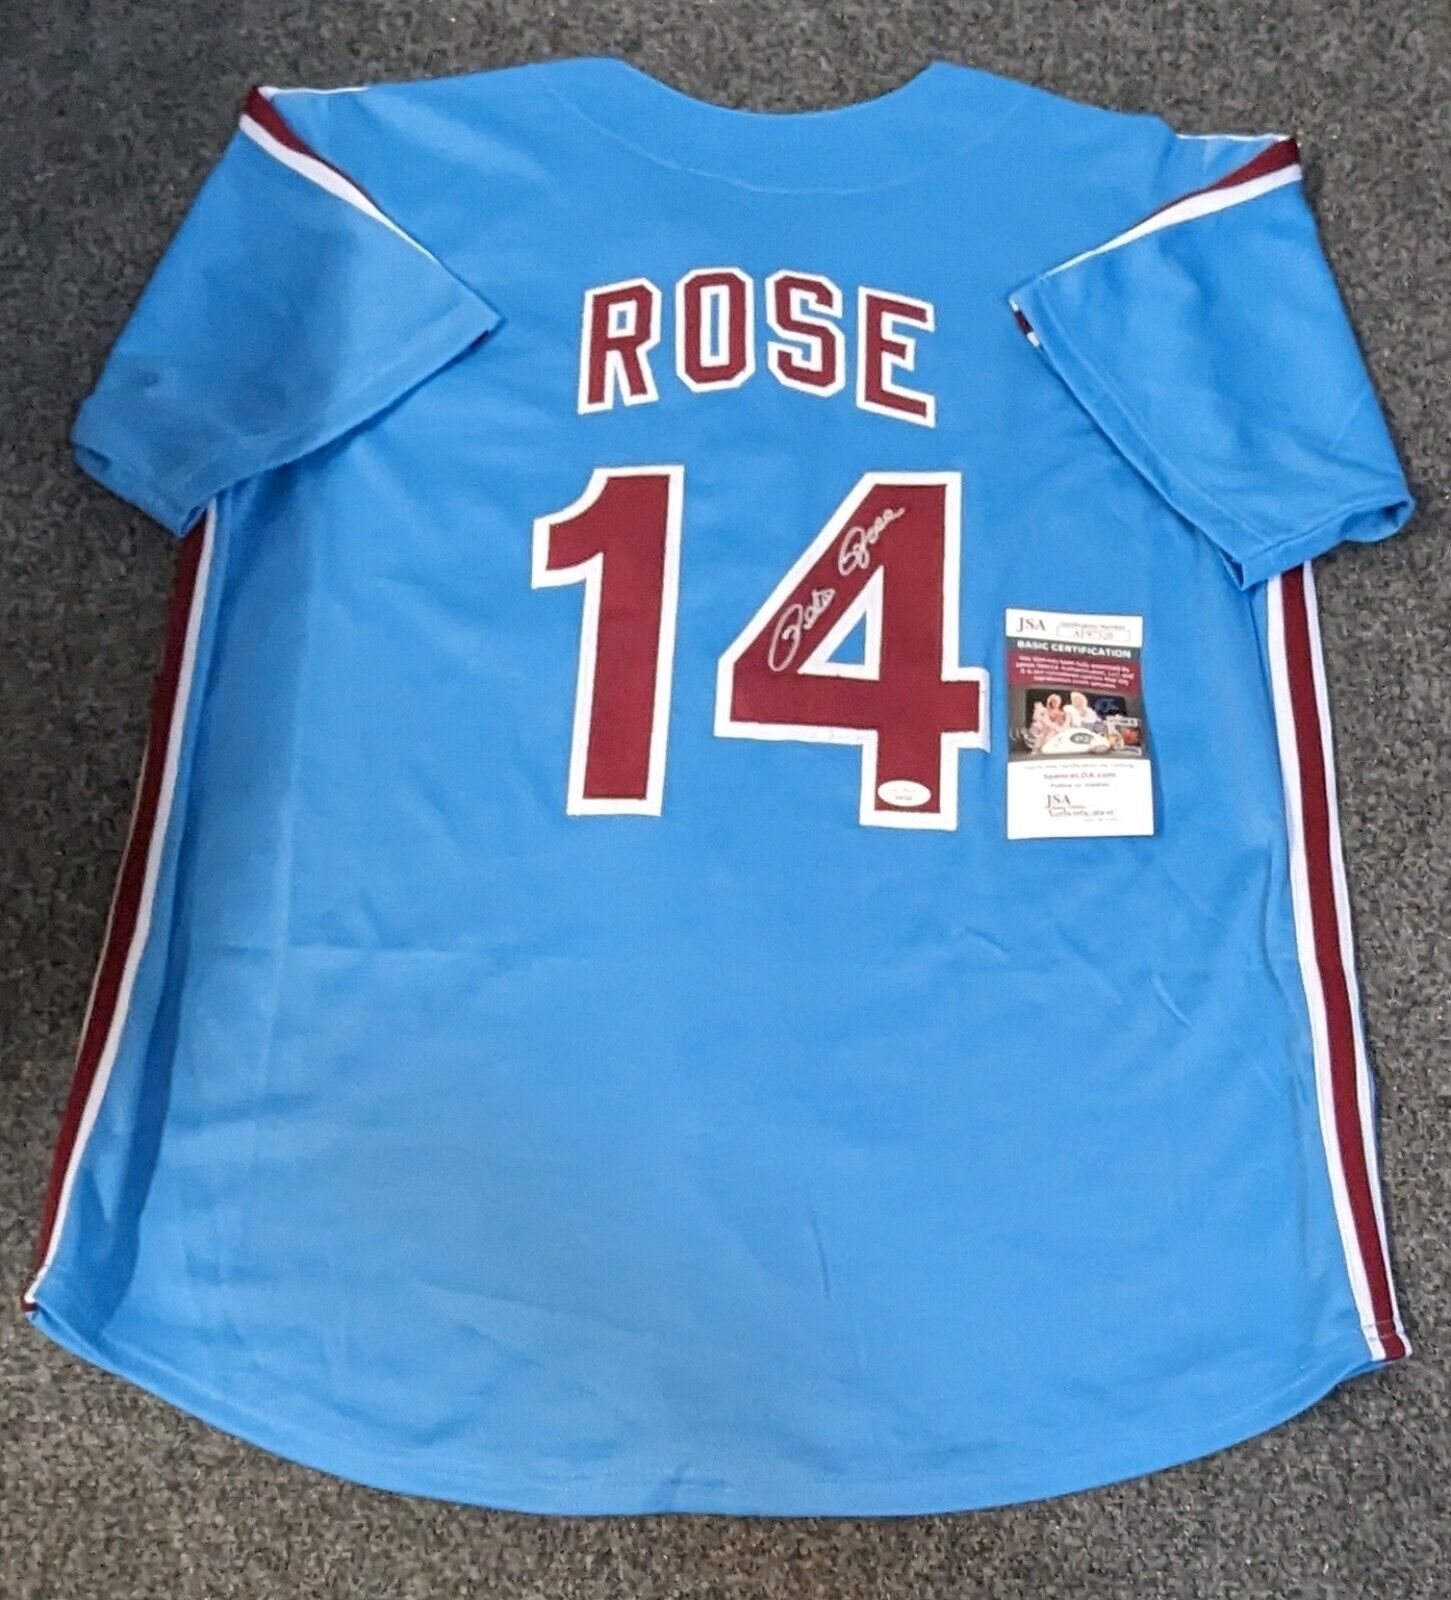 Pete Rose Autographed Stats Jersey (Number 70 of 114)